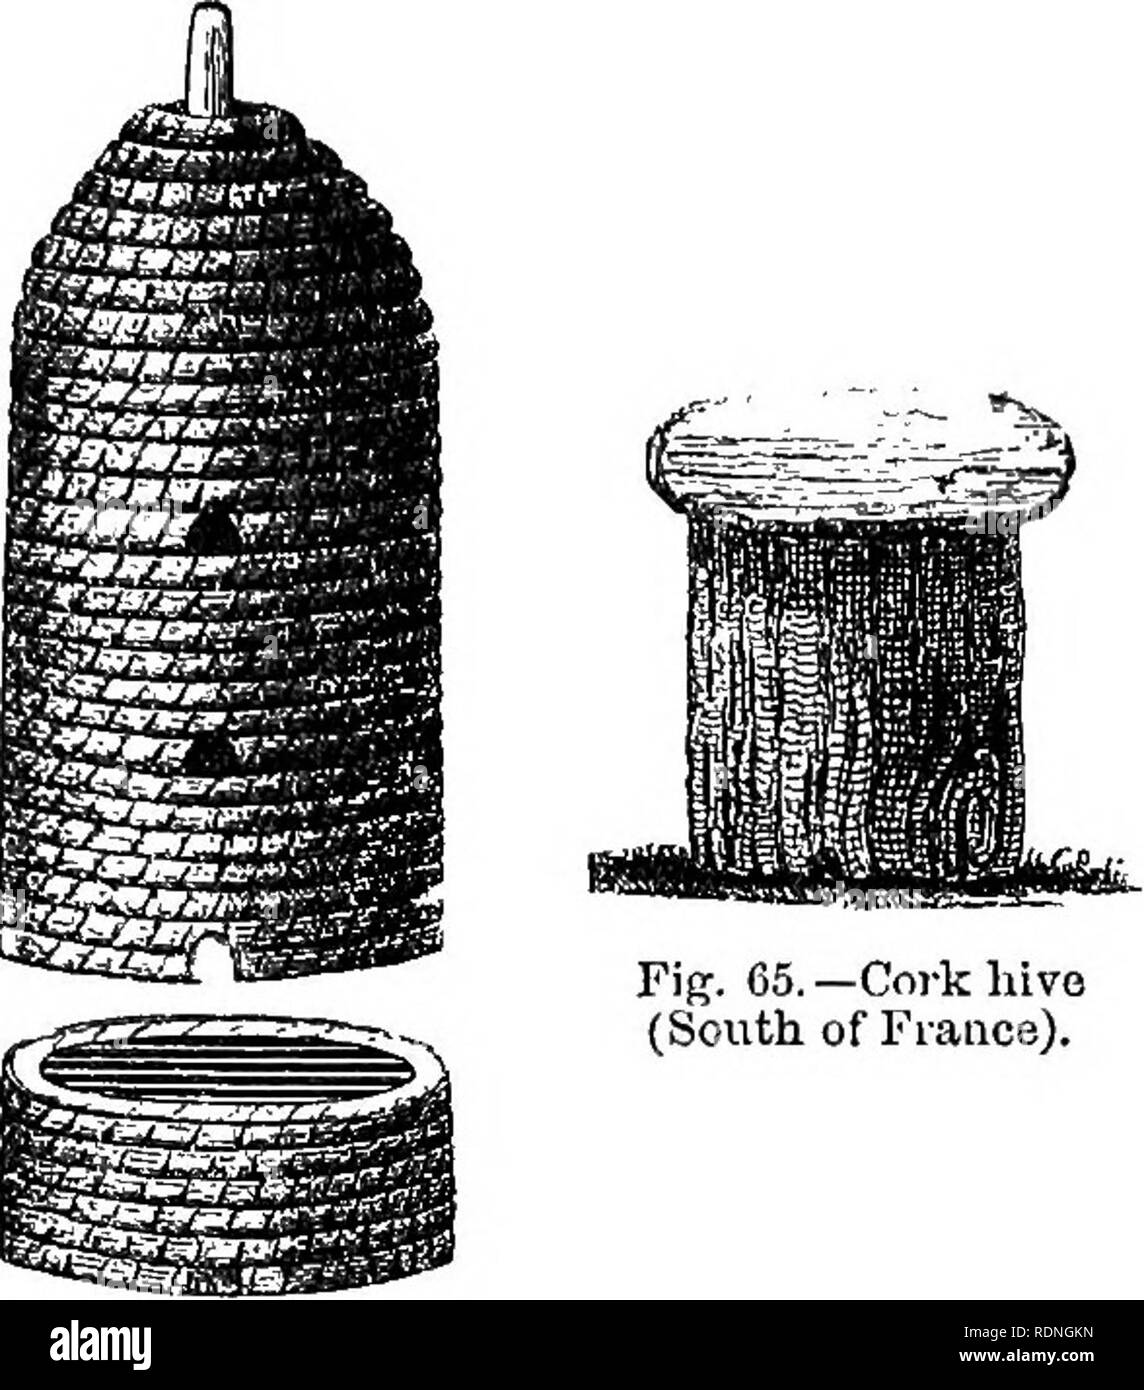 . The bee and white ants, their manners and habits; with illustrations of animal instinct and intelligence. Bees; Instinct; Termites. Fig. 63.—Scotch hive.. Fig. 65.—Cork hive (South of France). Fig. 64.—Radouau*s liive. THE BEE. CHAPTER VI. 158. How they fly straight back to the hive—manner of discovering the nests of wild liees in New England.—159. Average number of daily ex- cursions.—160. Bee pasturage—transported to follow it—in Egypt and Greece.—161. Neatness of the bee.—162. Its enemies.—163. Death's- head moth.—164. Measures of defence adopted by Huber.—165. Mea- sures adopted bythe be Stock Photo